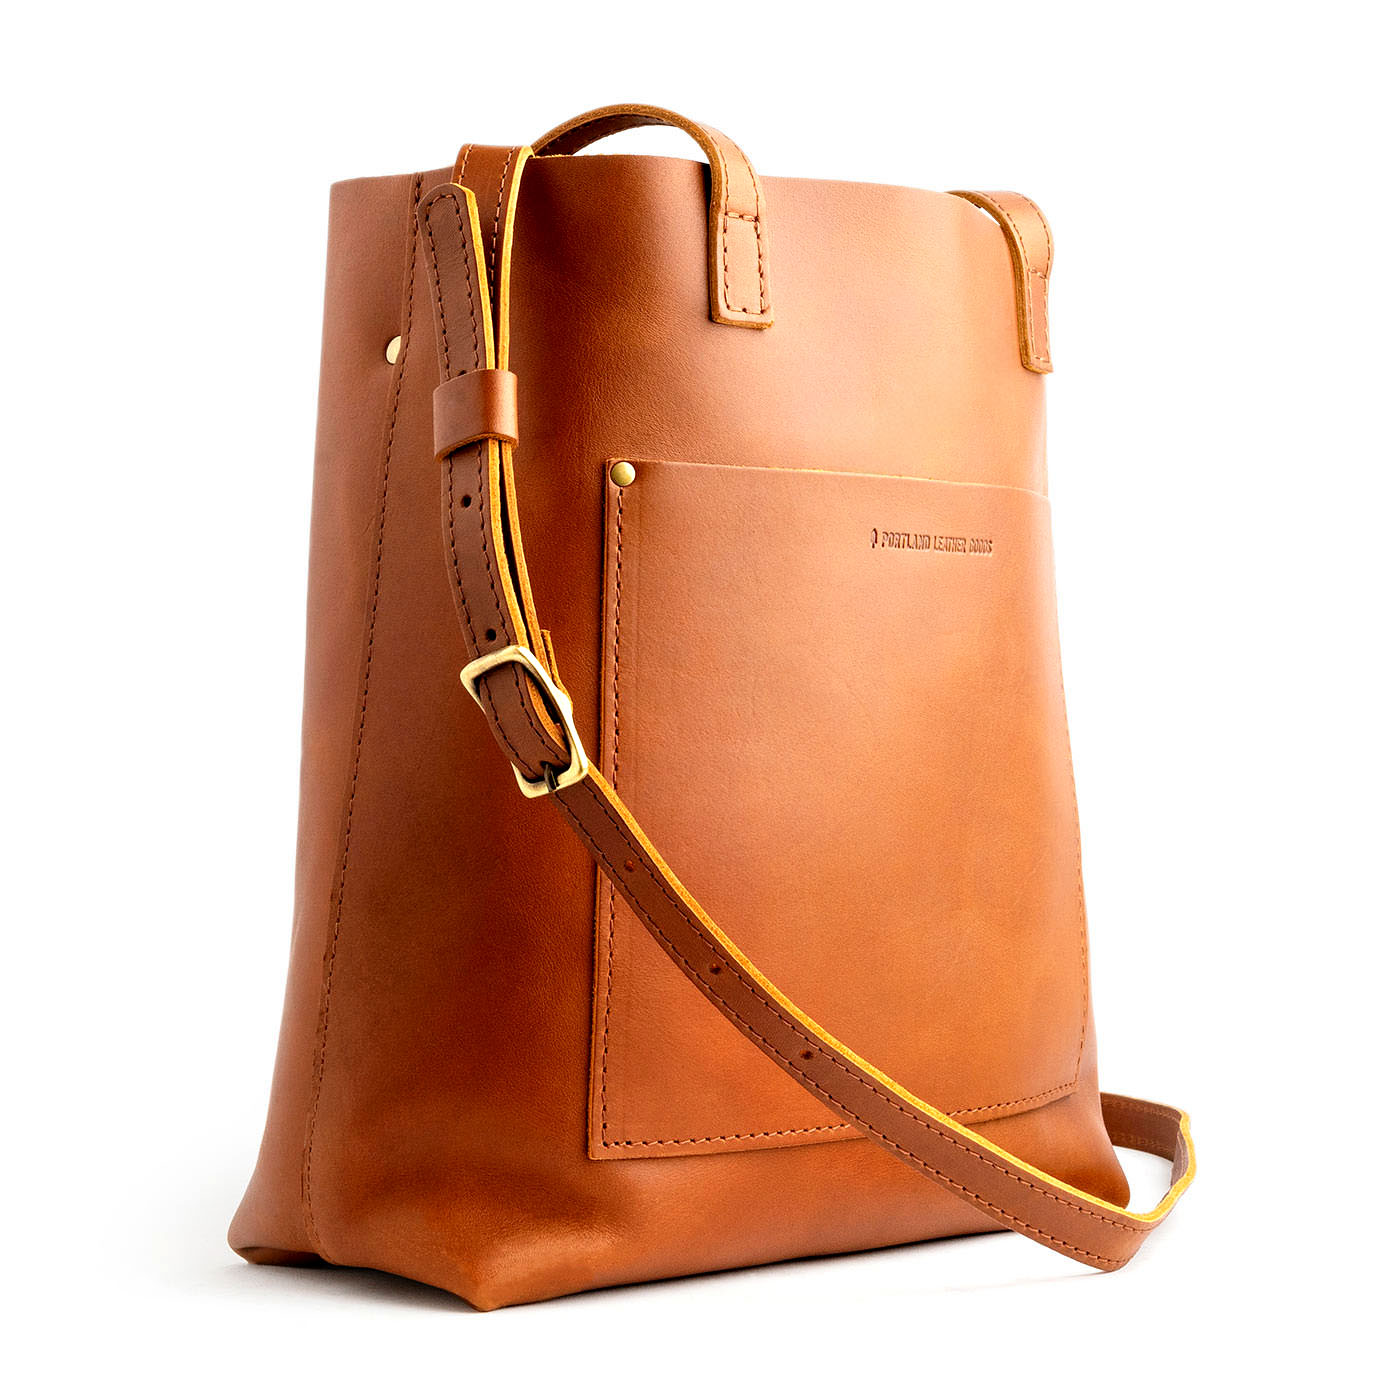 All Color: Honey | leather crossbody large tote bag purse tan brown